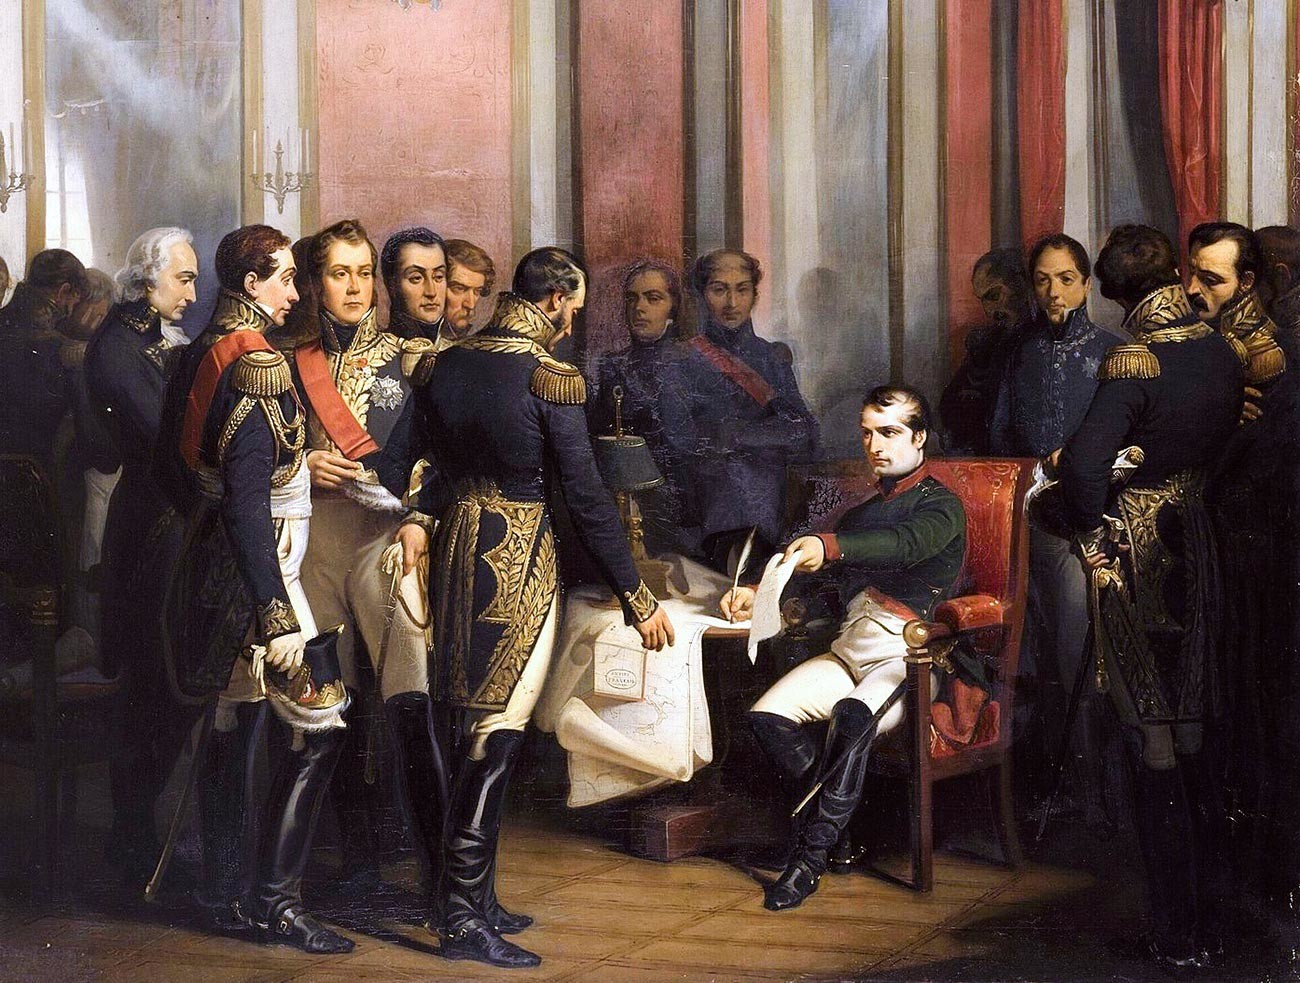 François Bouchot. The Abdication of Napoleon at Fontainebleau on 11 April 1814.